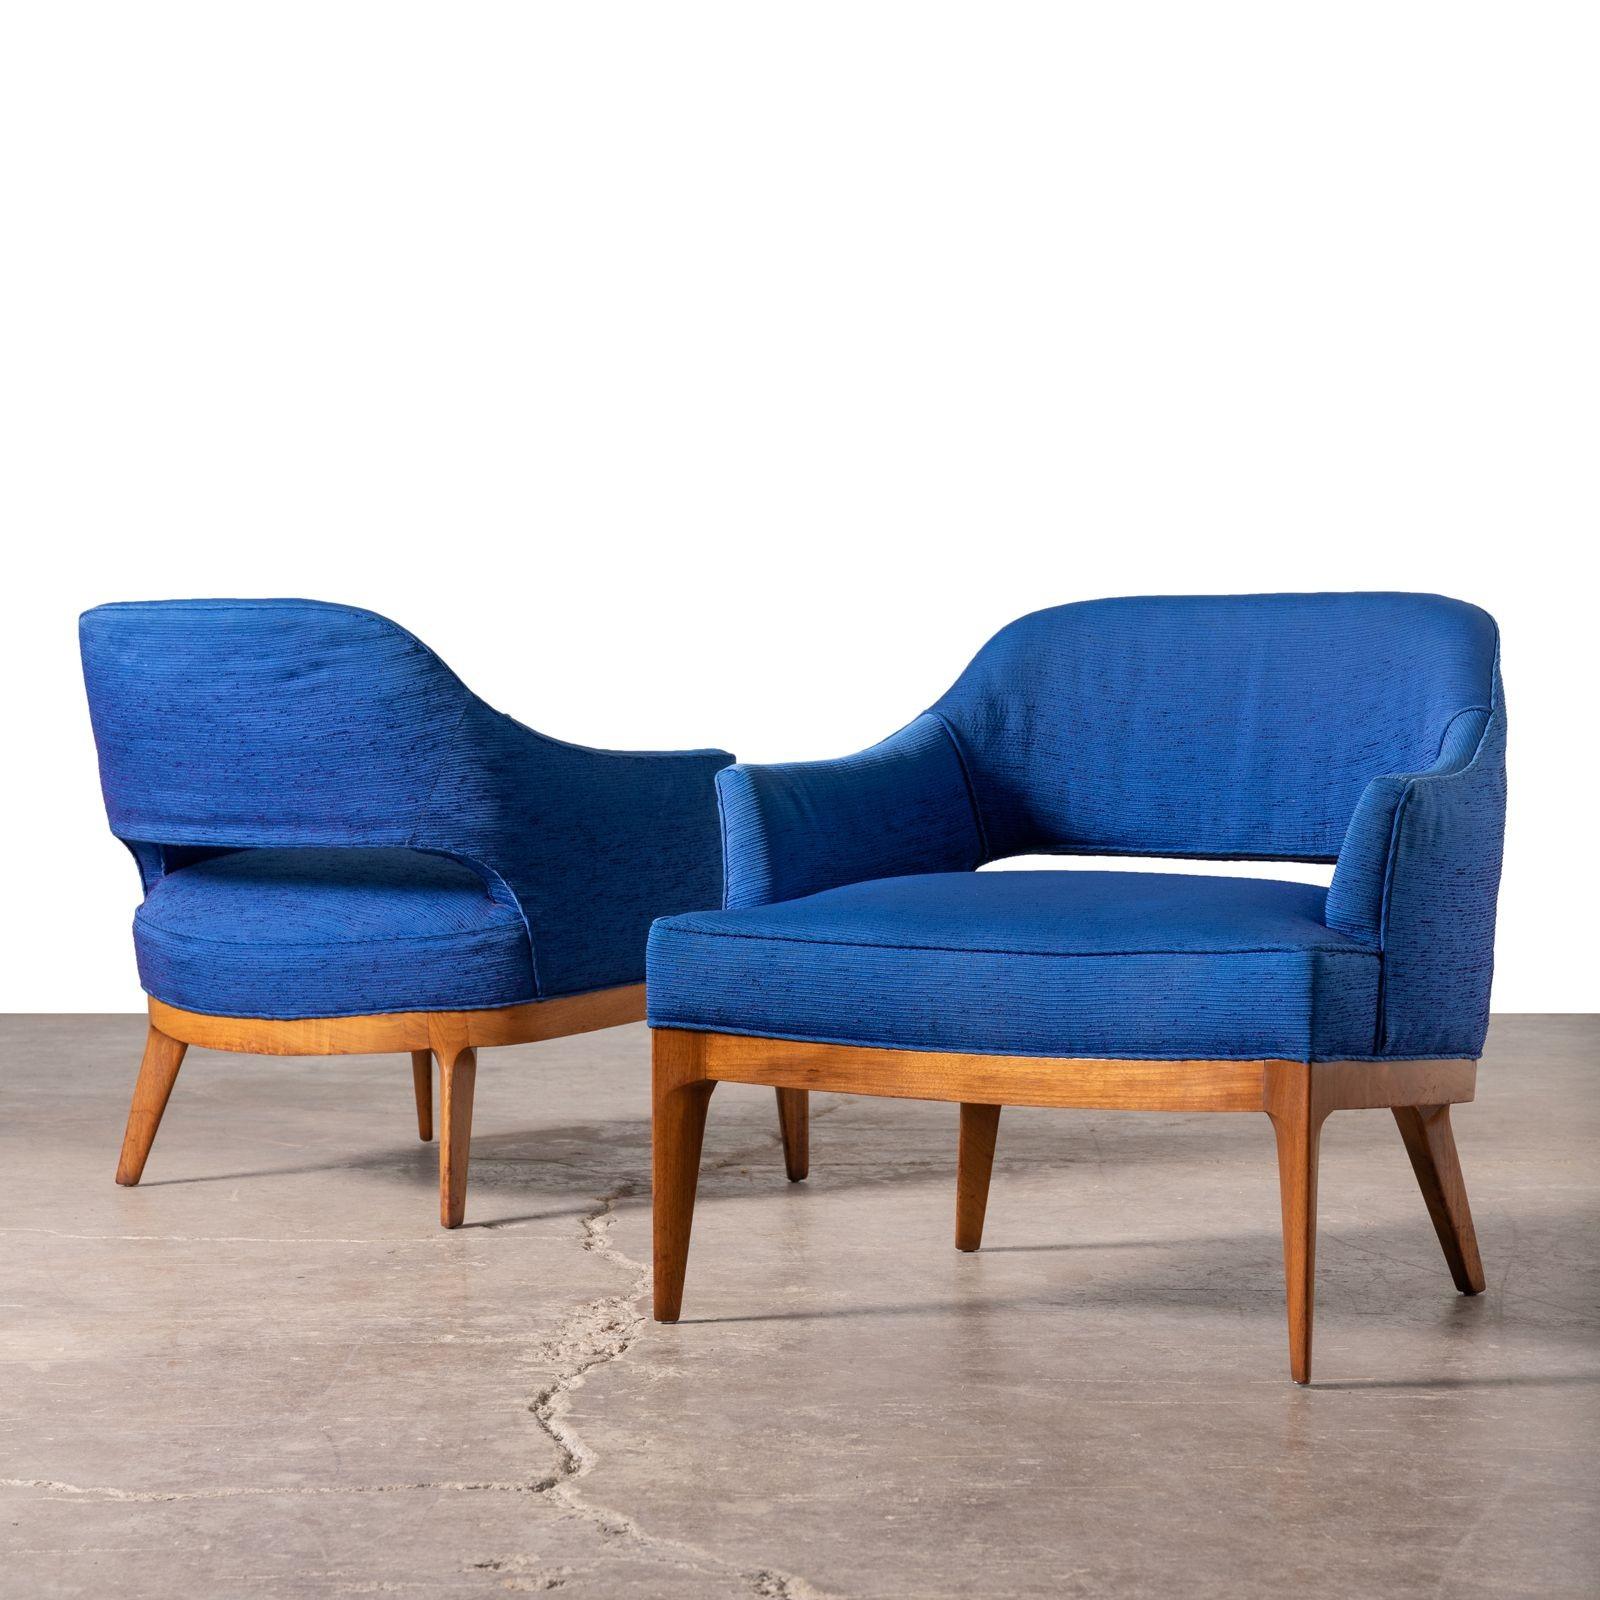 American Erwin Lambeth Open Back Lounge Chairs in Raw Blue Silk with Walnut Frames 1960s For Sale